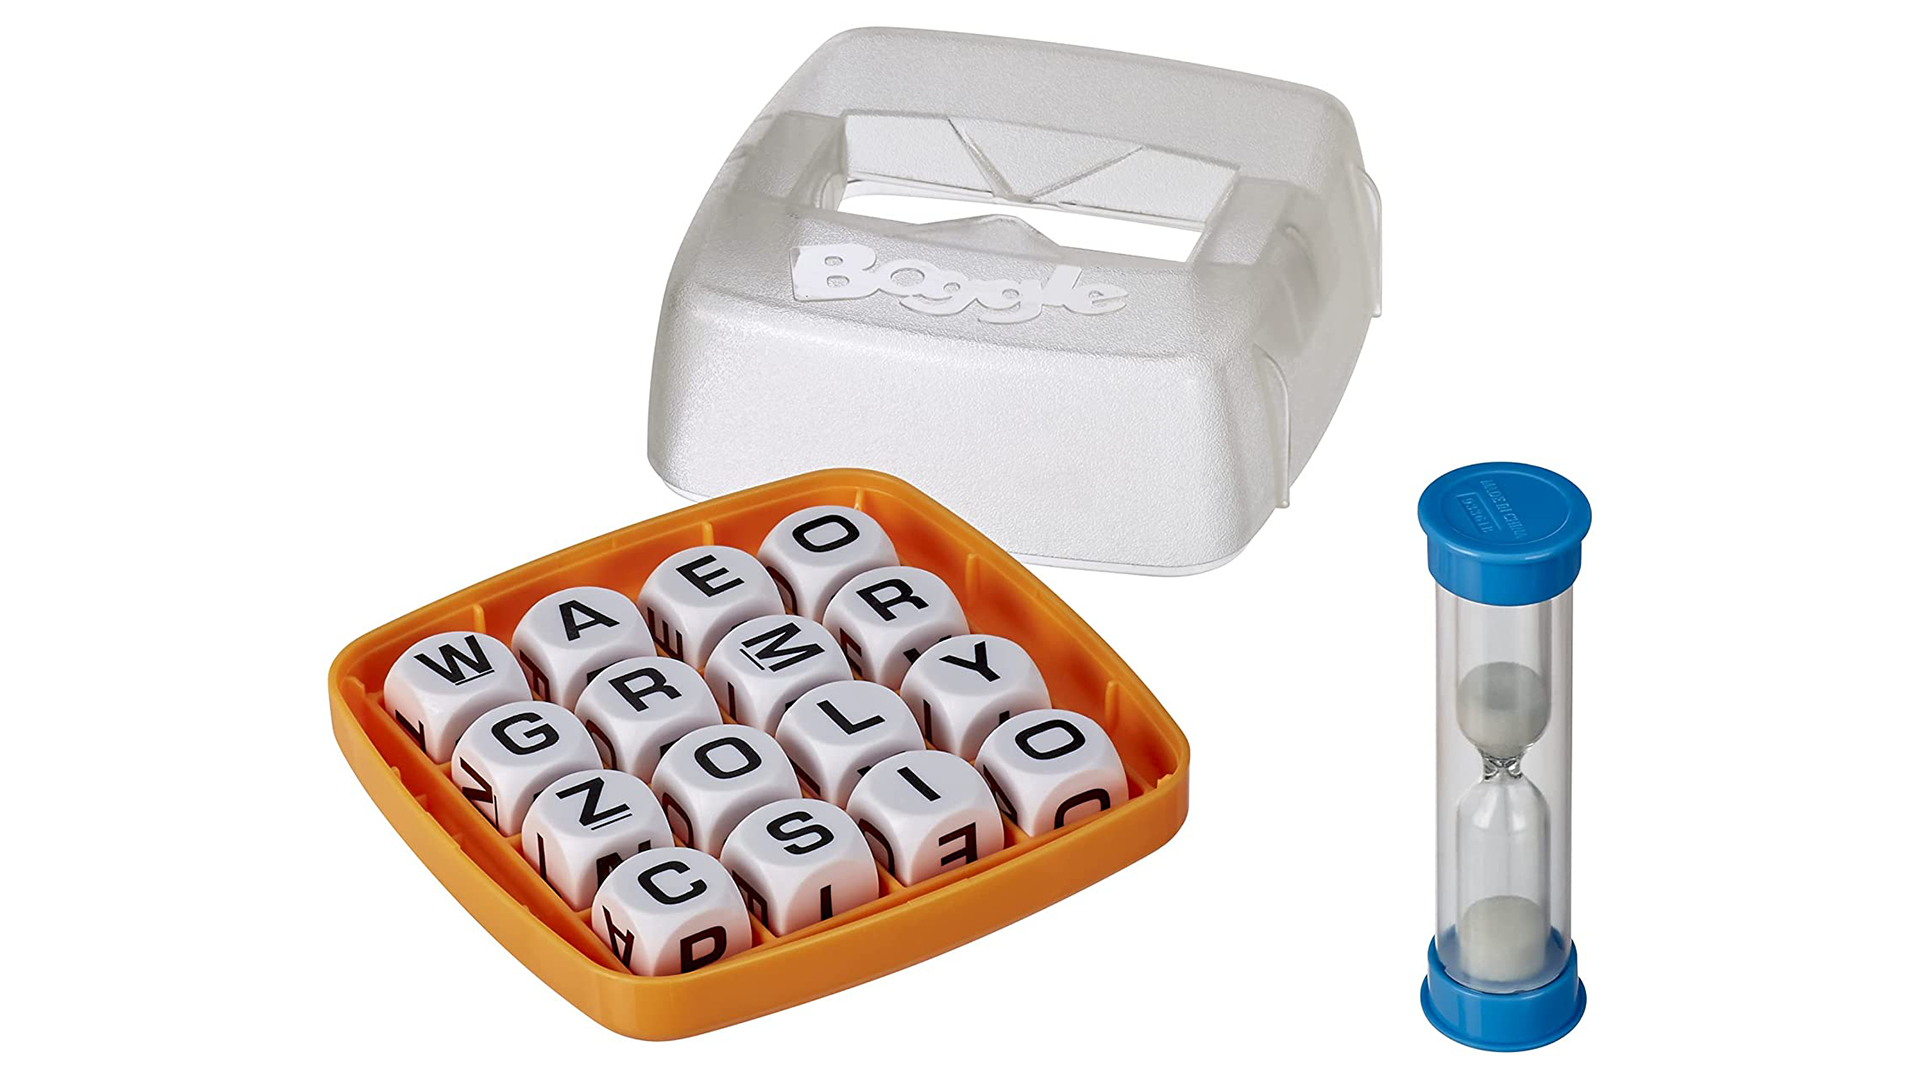 Boggle word cubes in the tray with the sand timer running